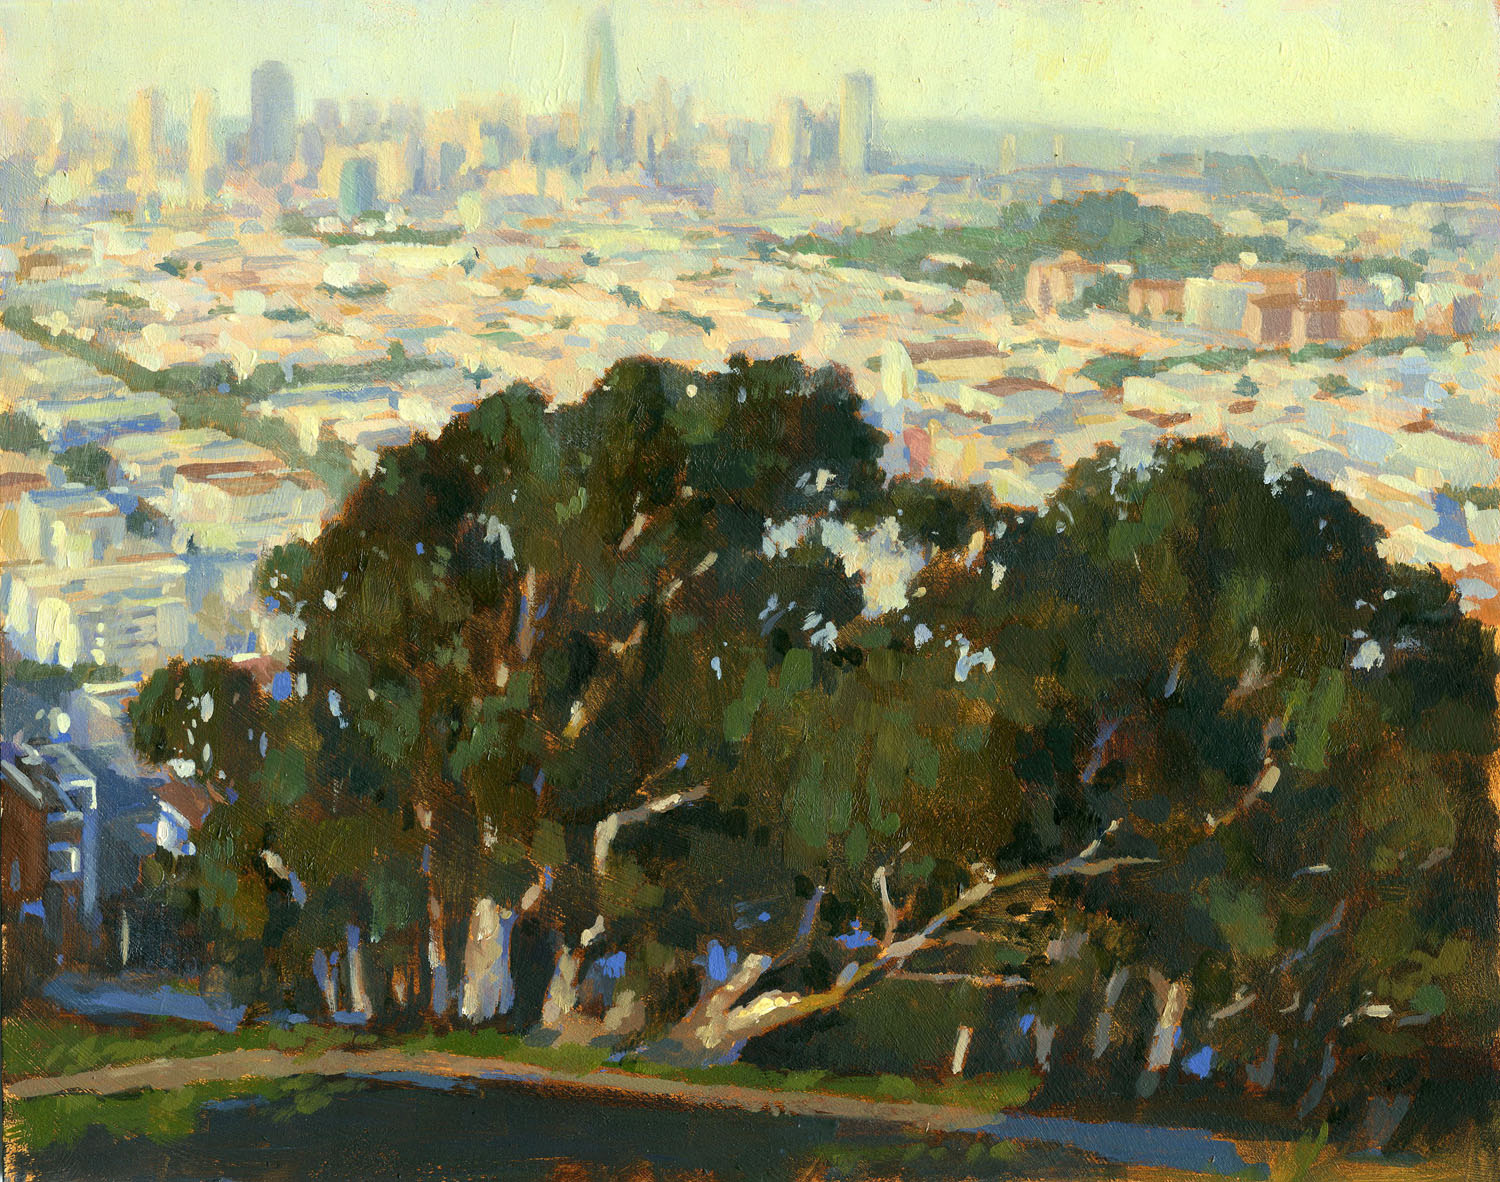 View from Bernal Heights